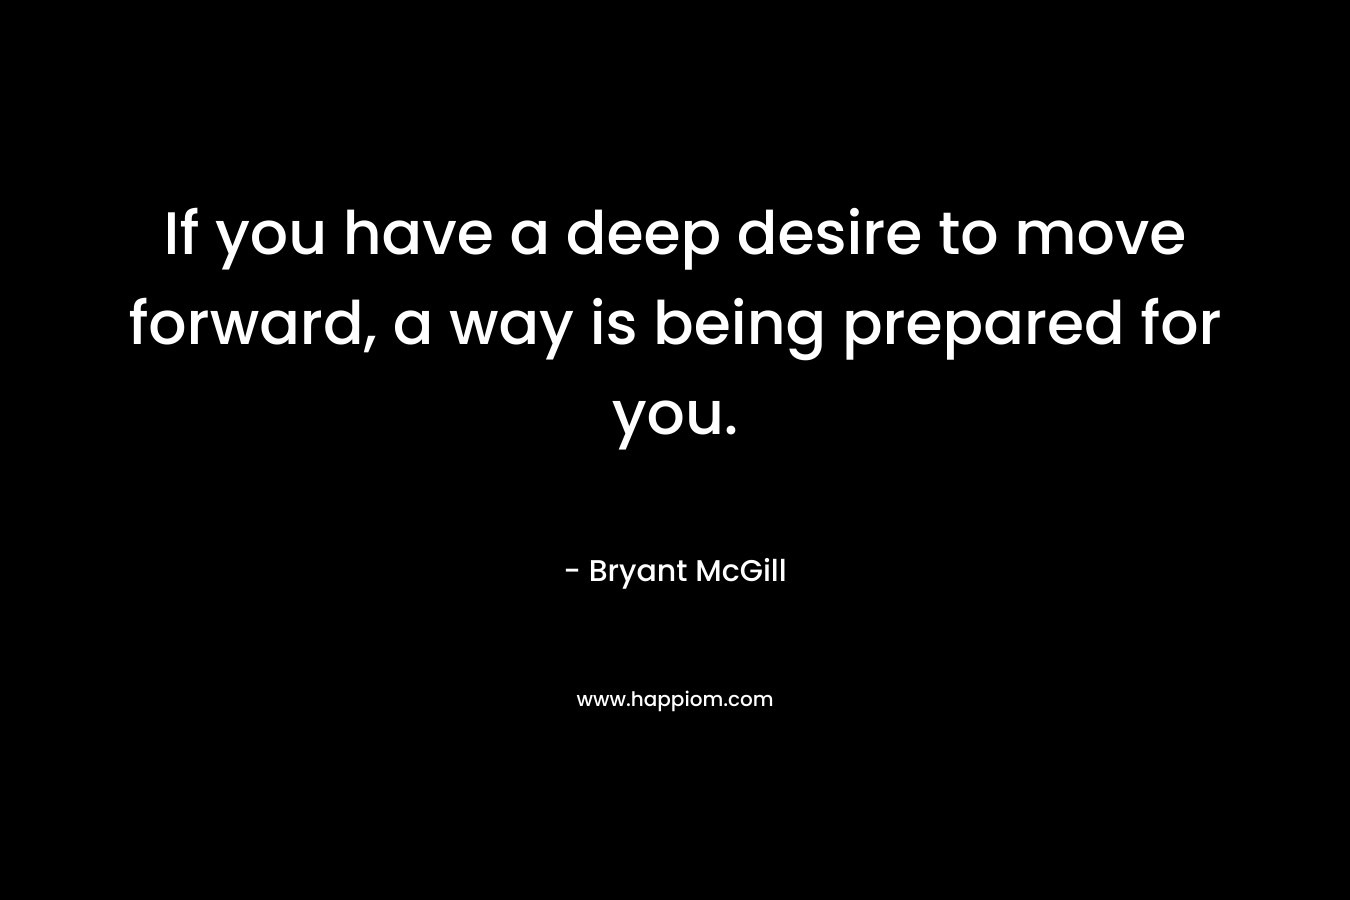 If you have a deep desire to move forward, a way is being prepared for you.